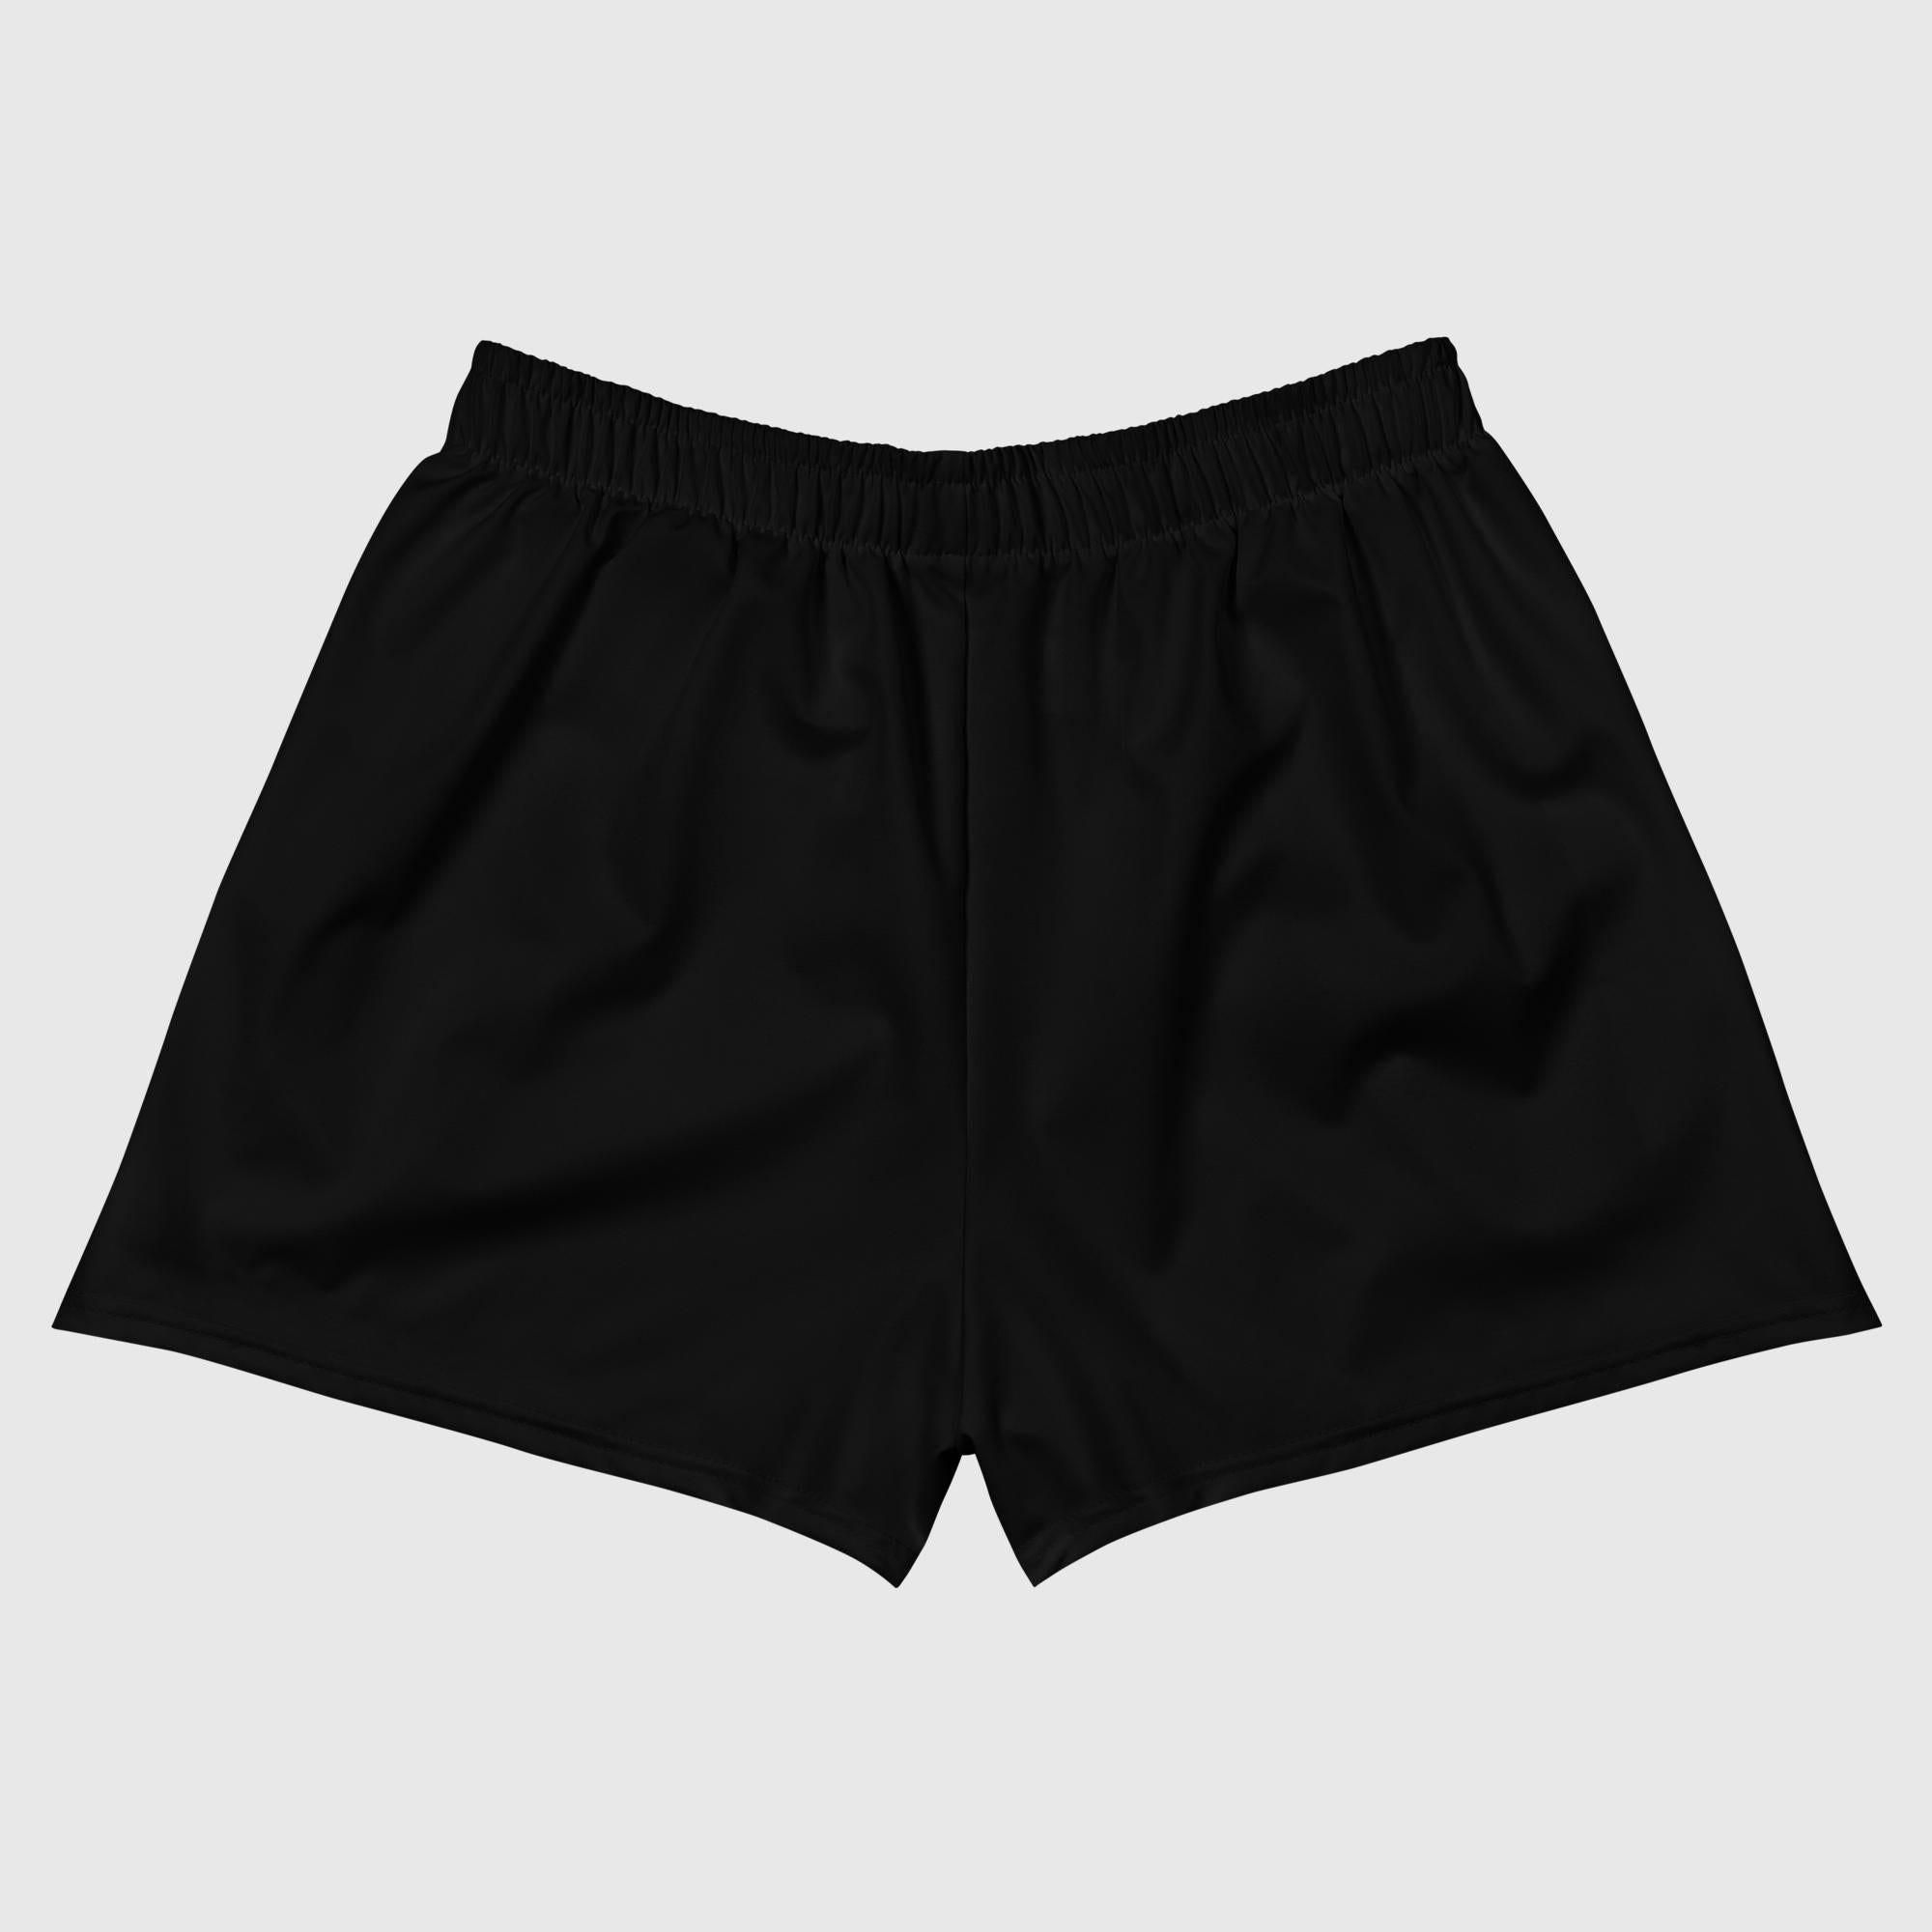 All-Over Print Unisex Athletic Shorts - Black